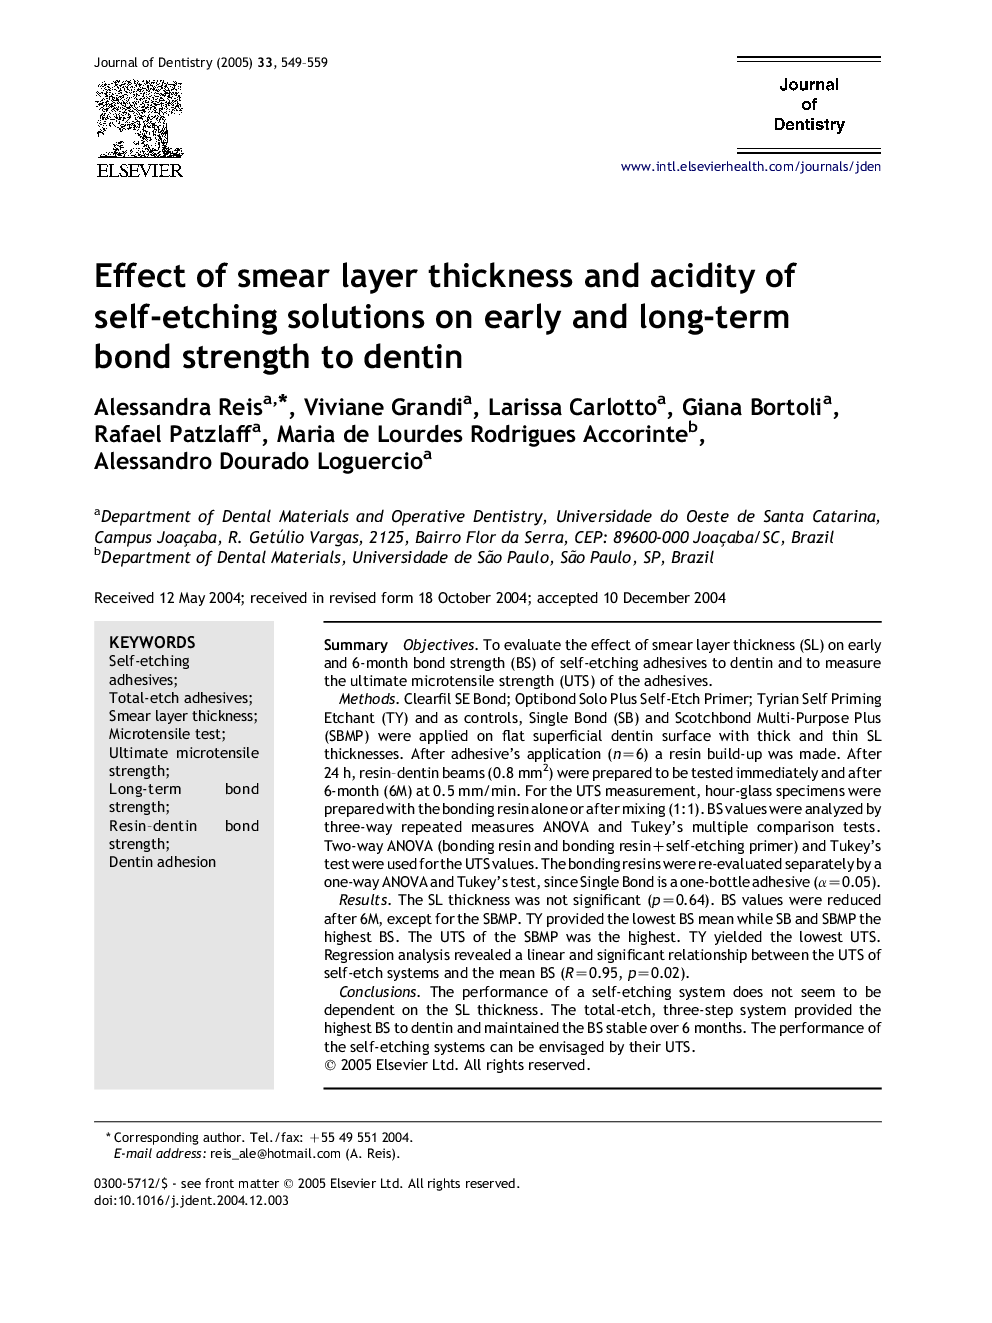 Effect of smear layer thickness and acidity of self-etching solutions on early and long-term bond strength to dentin